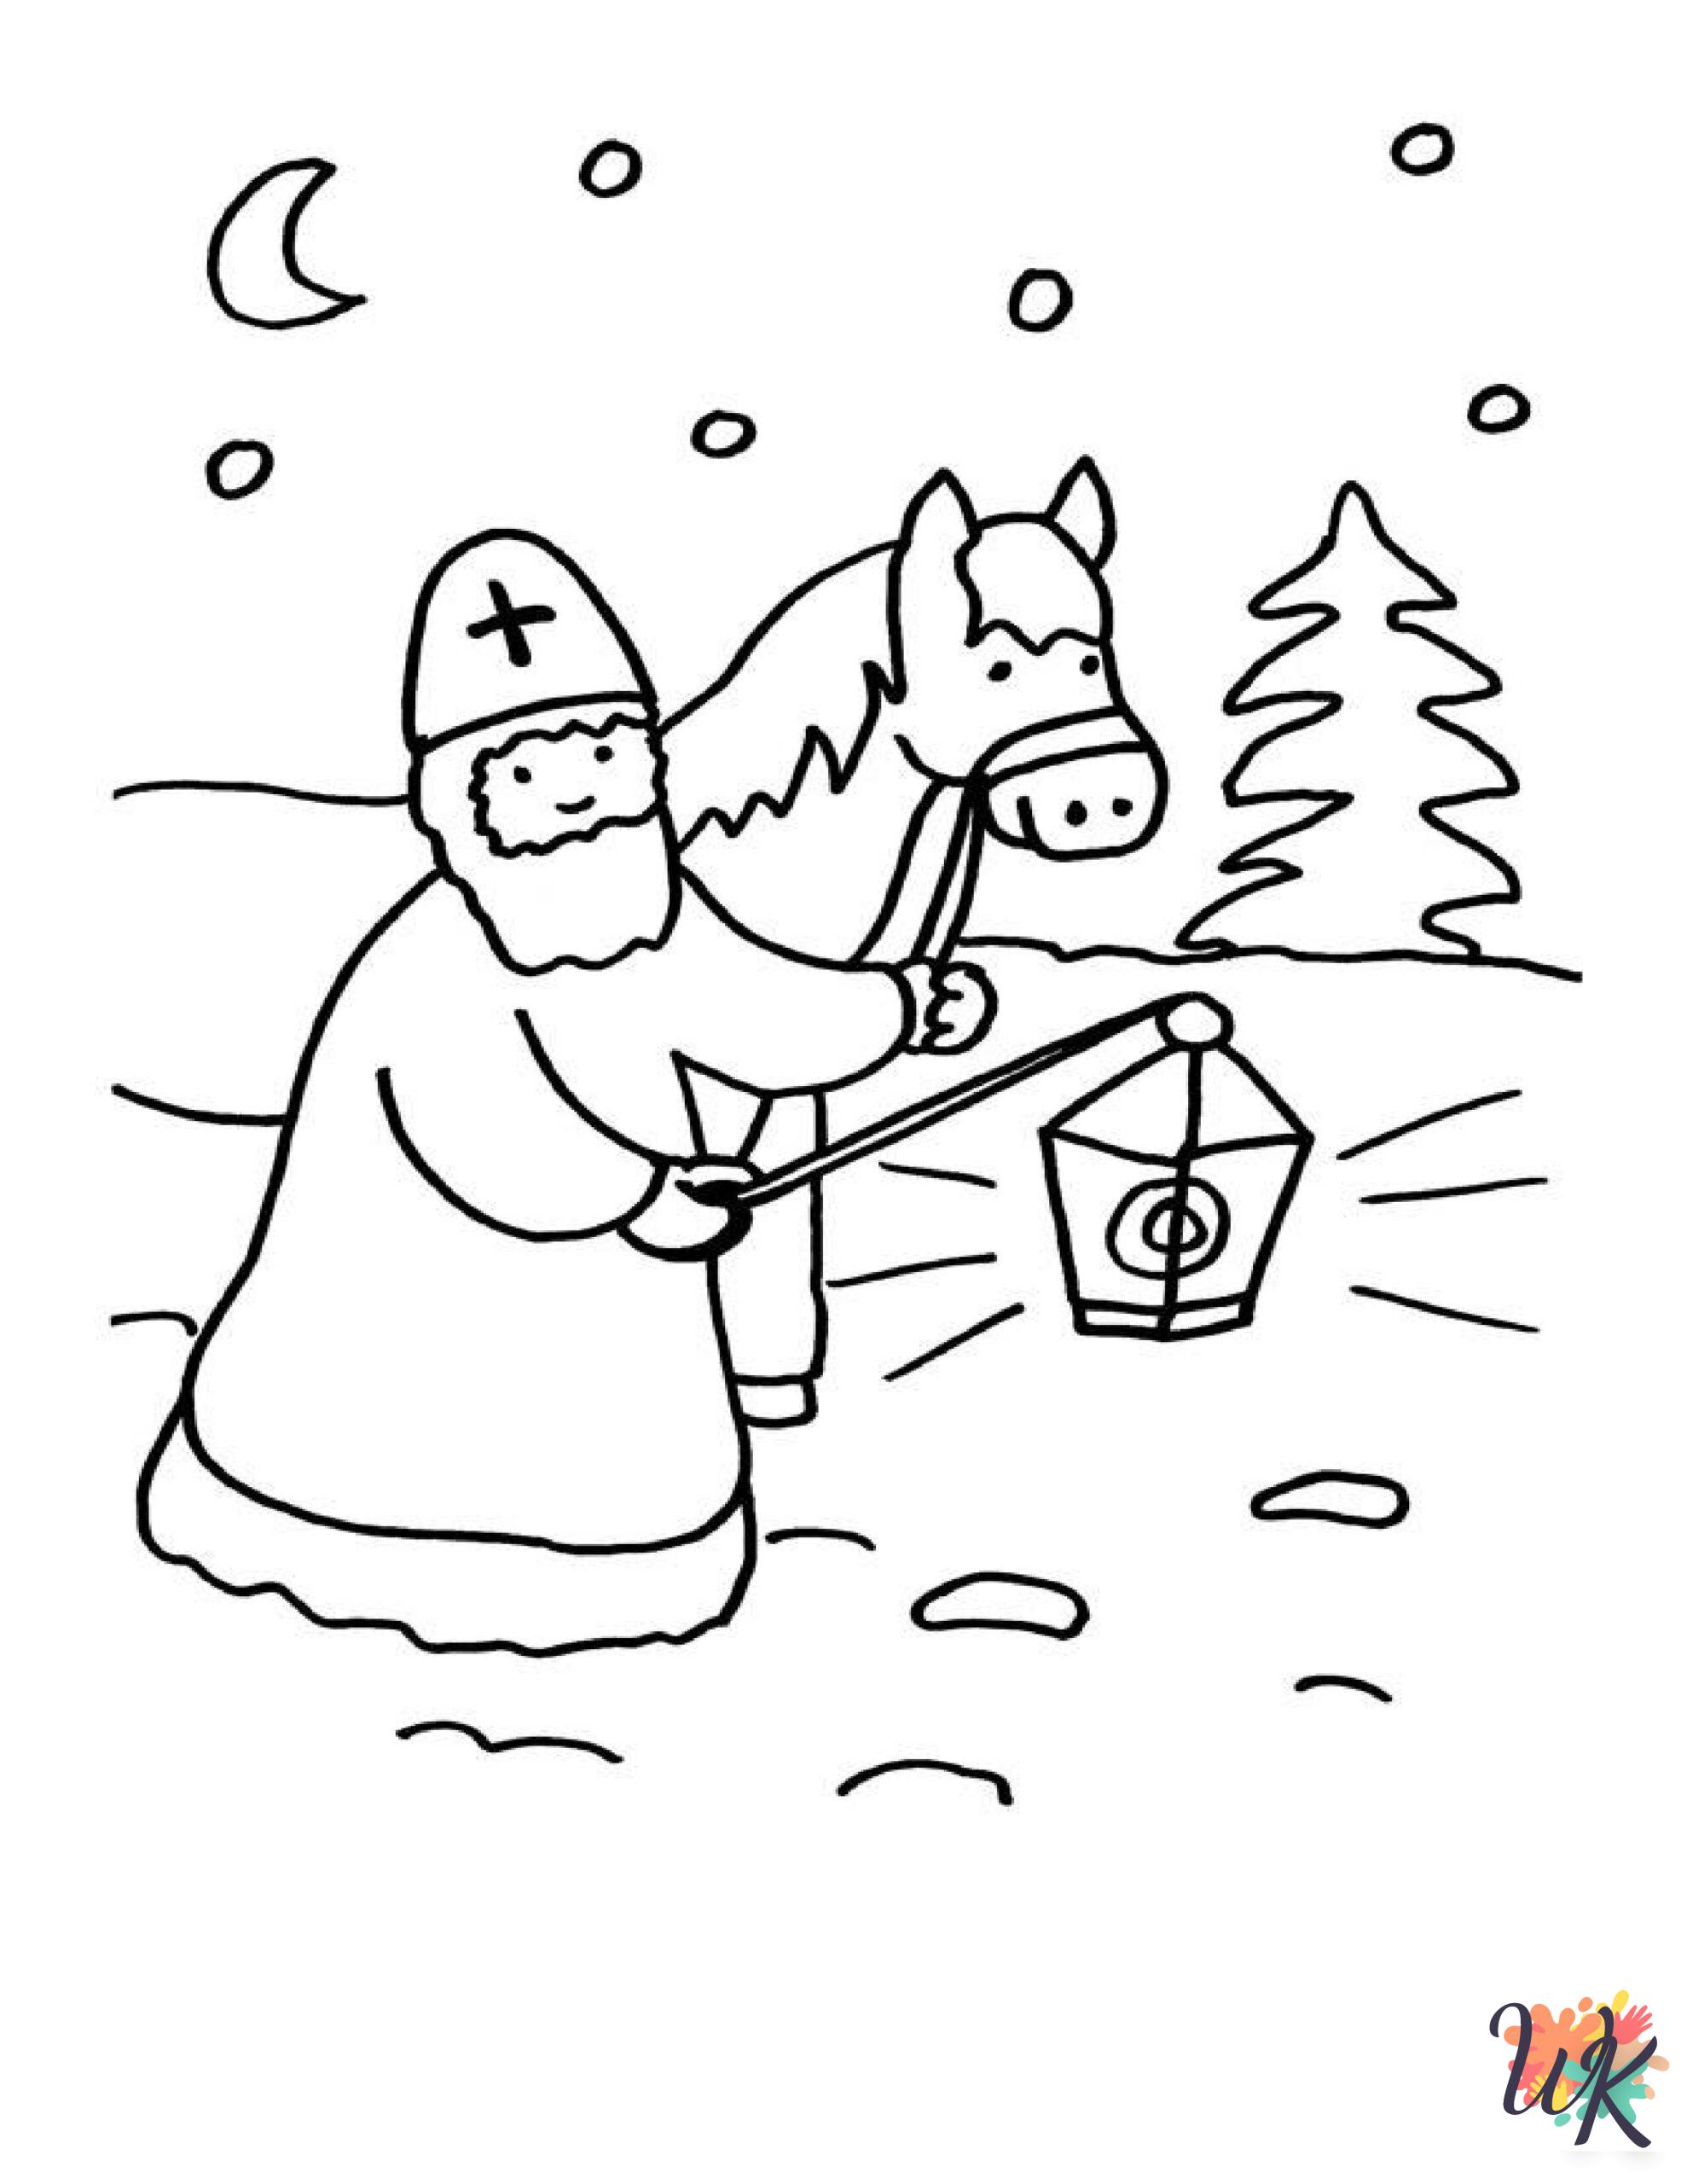 Saint Martin coloring pages printable free